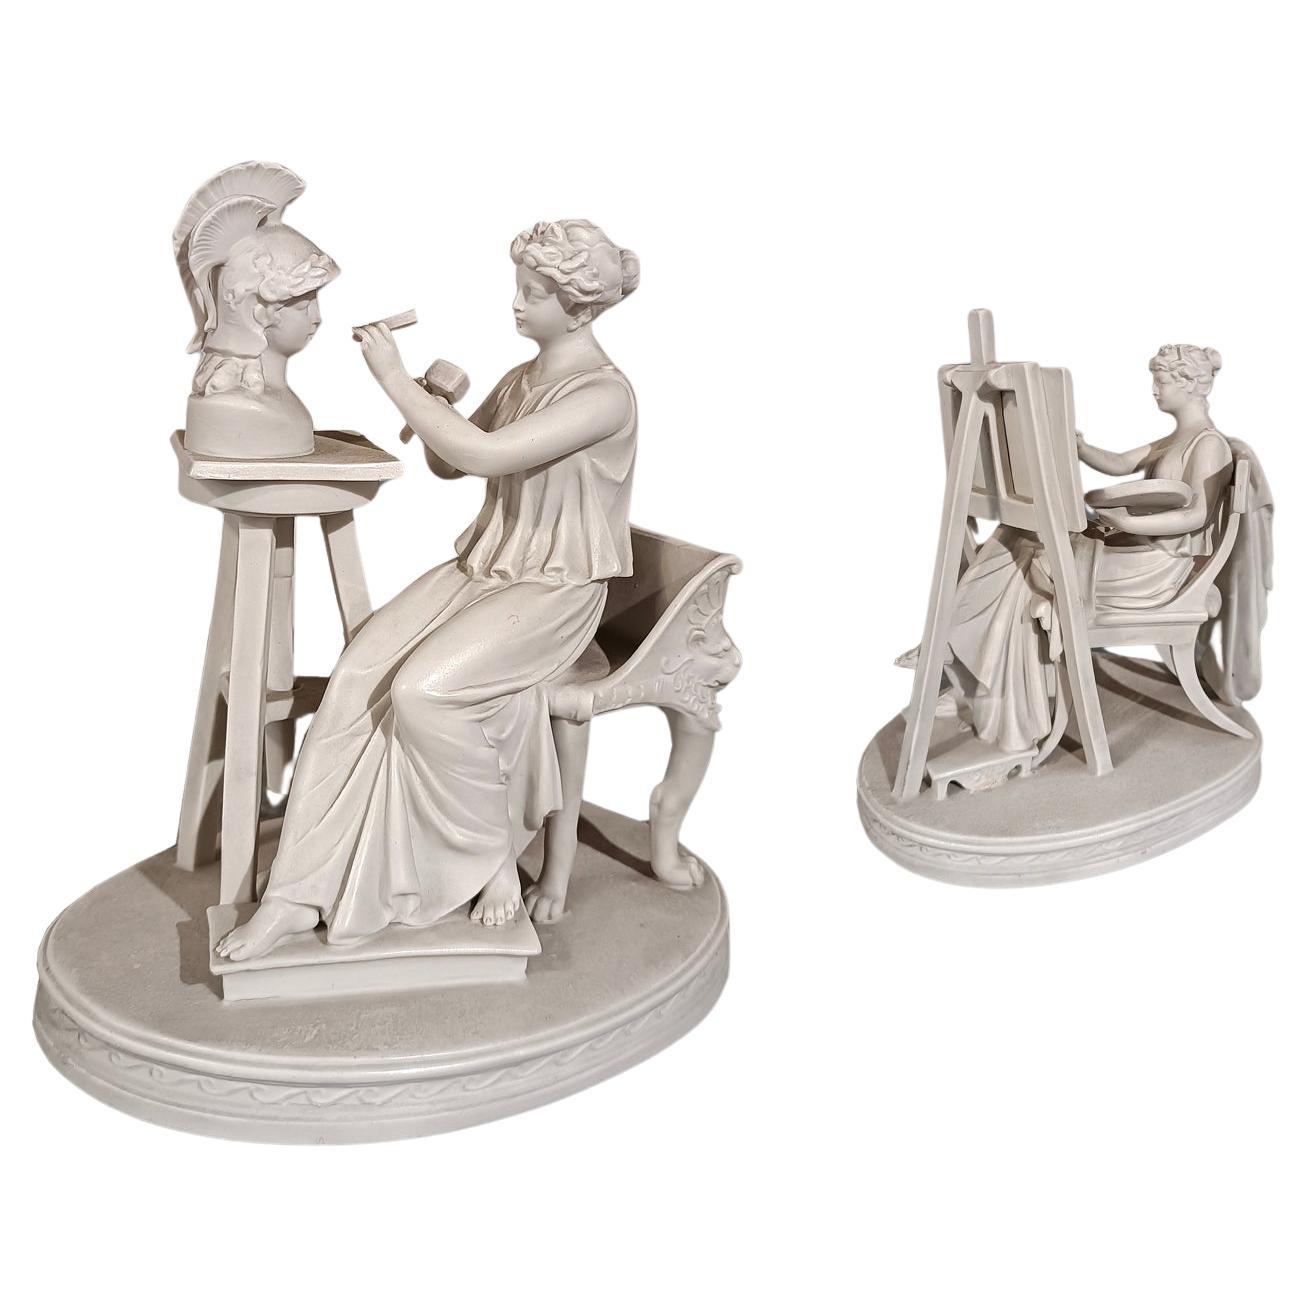 EARLY 19th CENTURY PAIR OF SCULPTURES “ALLEGORY OF THE ARTS” 